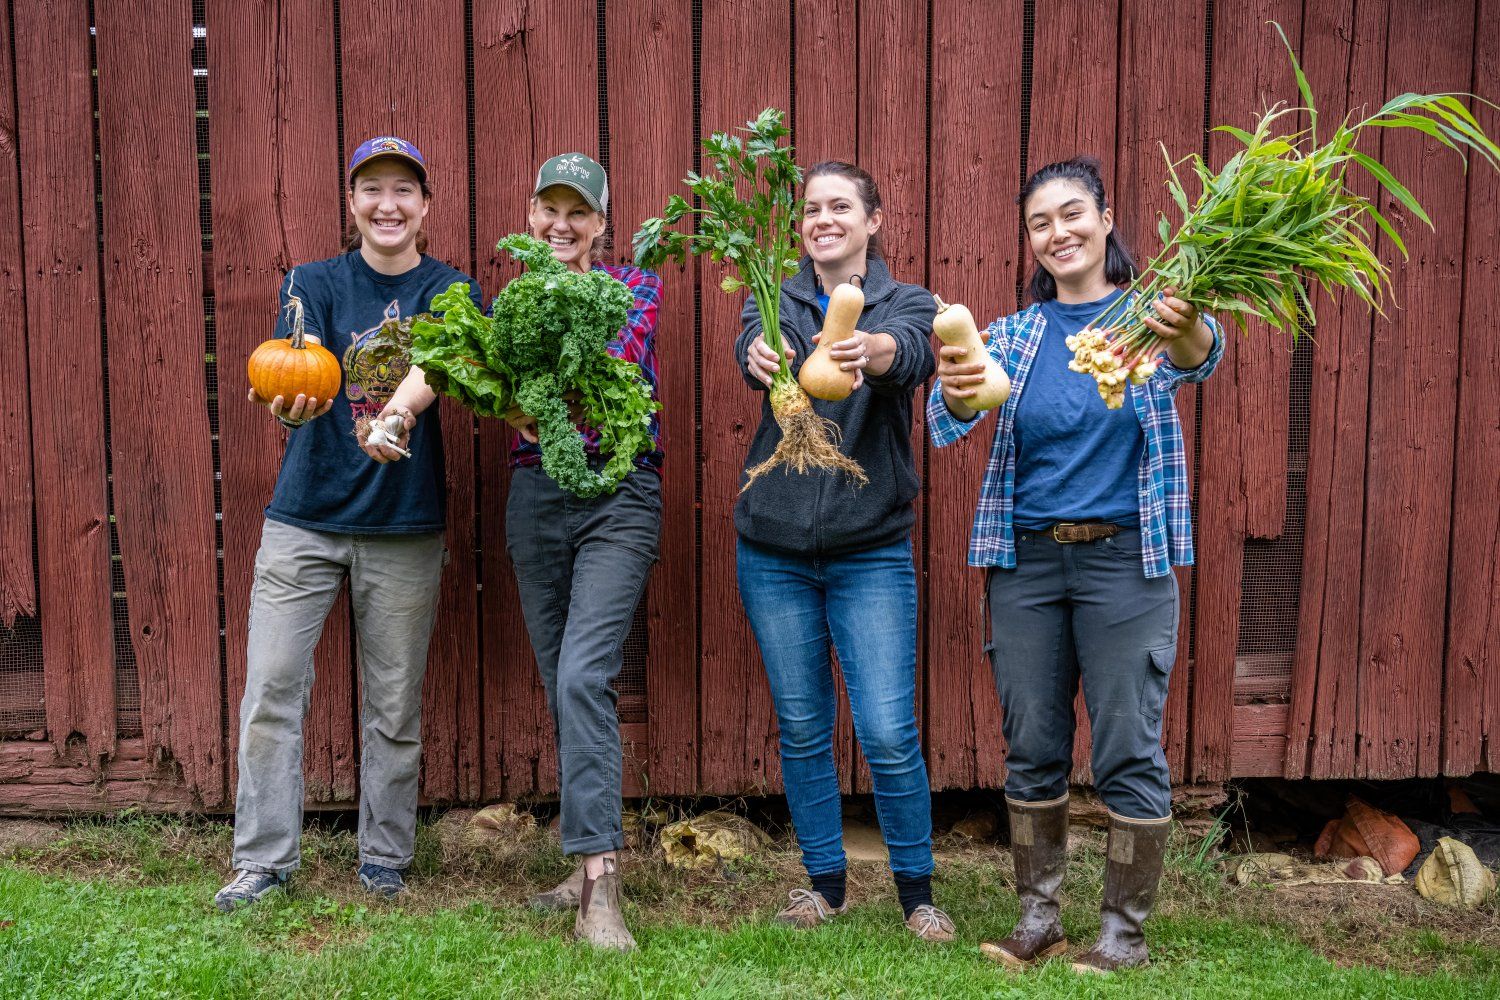 Previous Happening: Farm Happenings for October 26, 2021